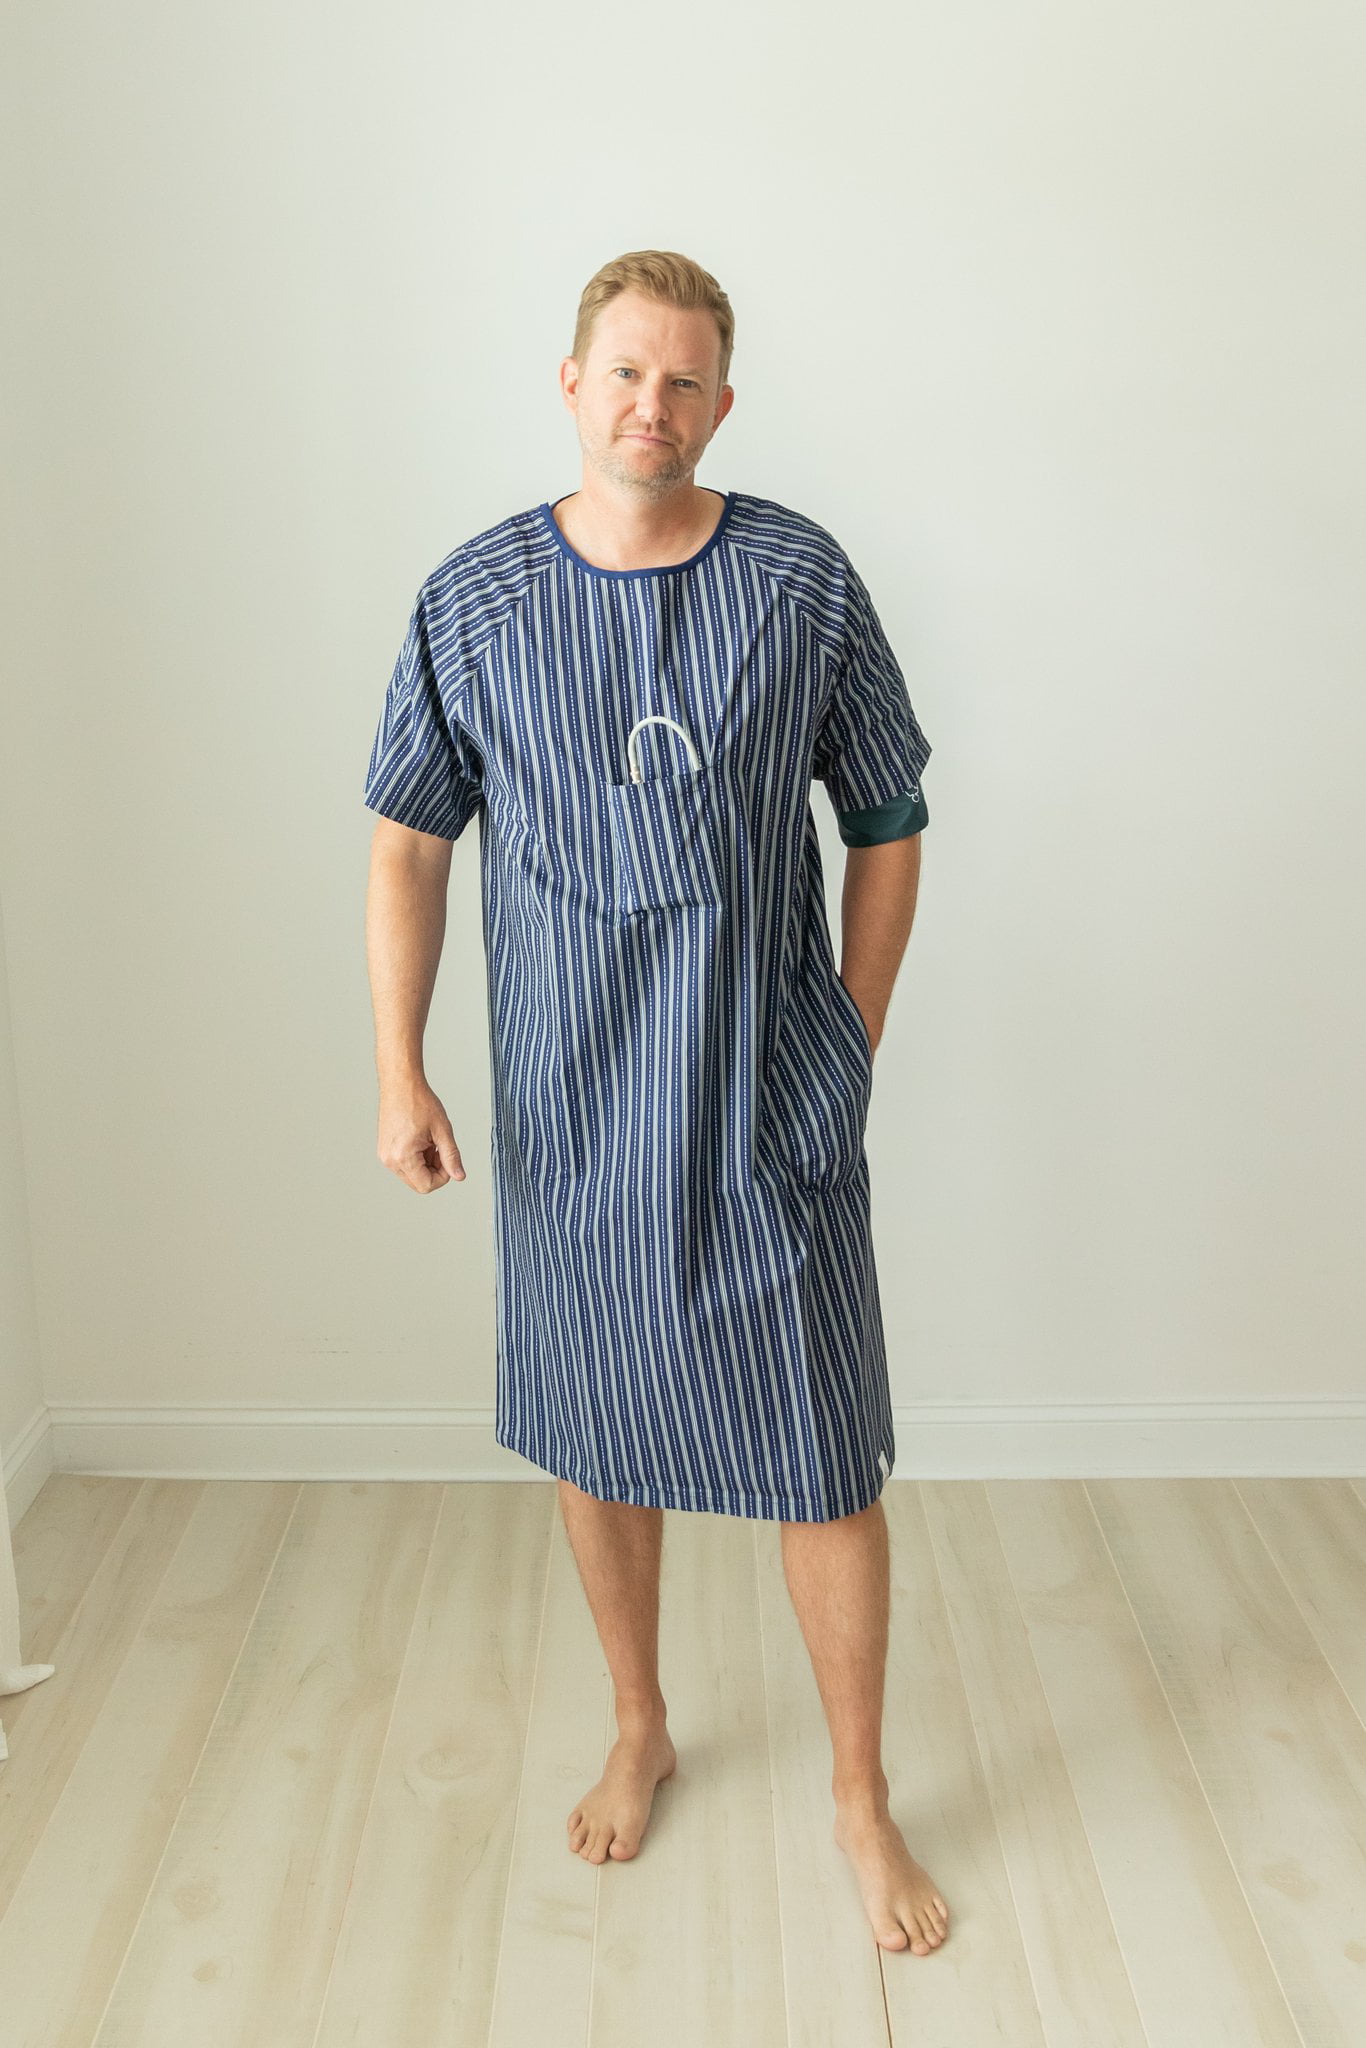 2 Pack - IV Hospital Gown 2 Back Tie Overlap, Multi Print - Unisex - One  Size fits Most Small - XL Men and Women - Walmart.com